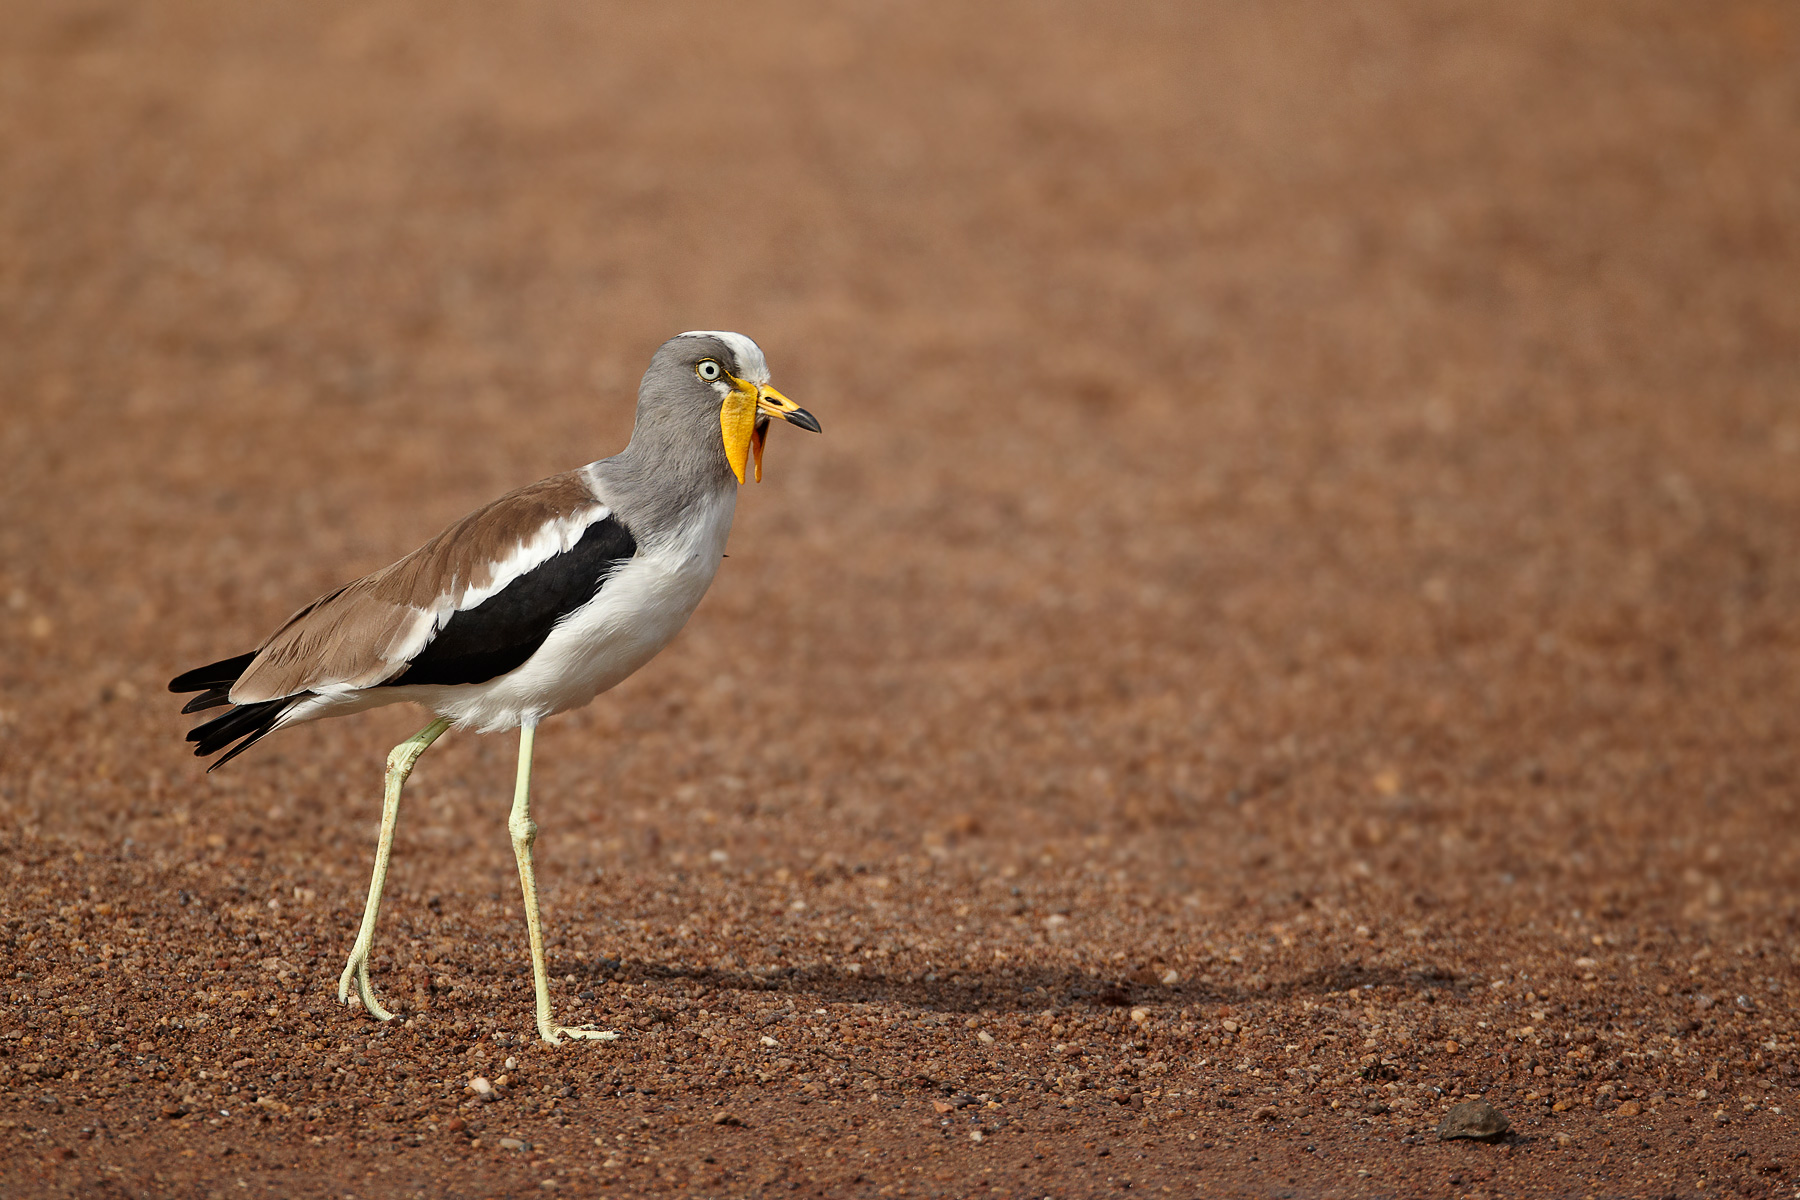 White-headed Lapwing (Vanellus albiceps)